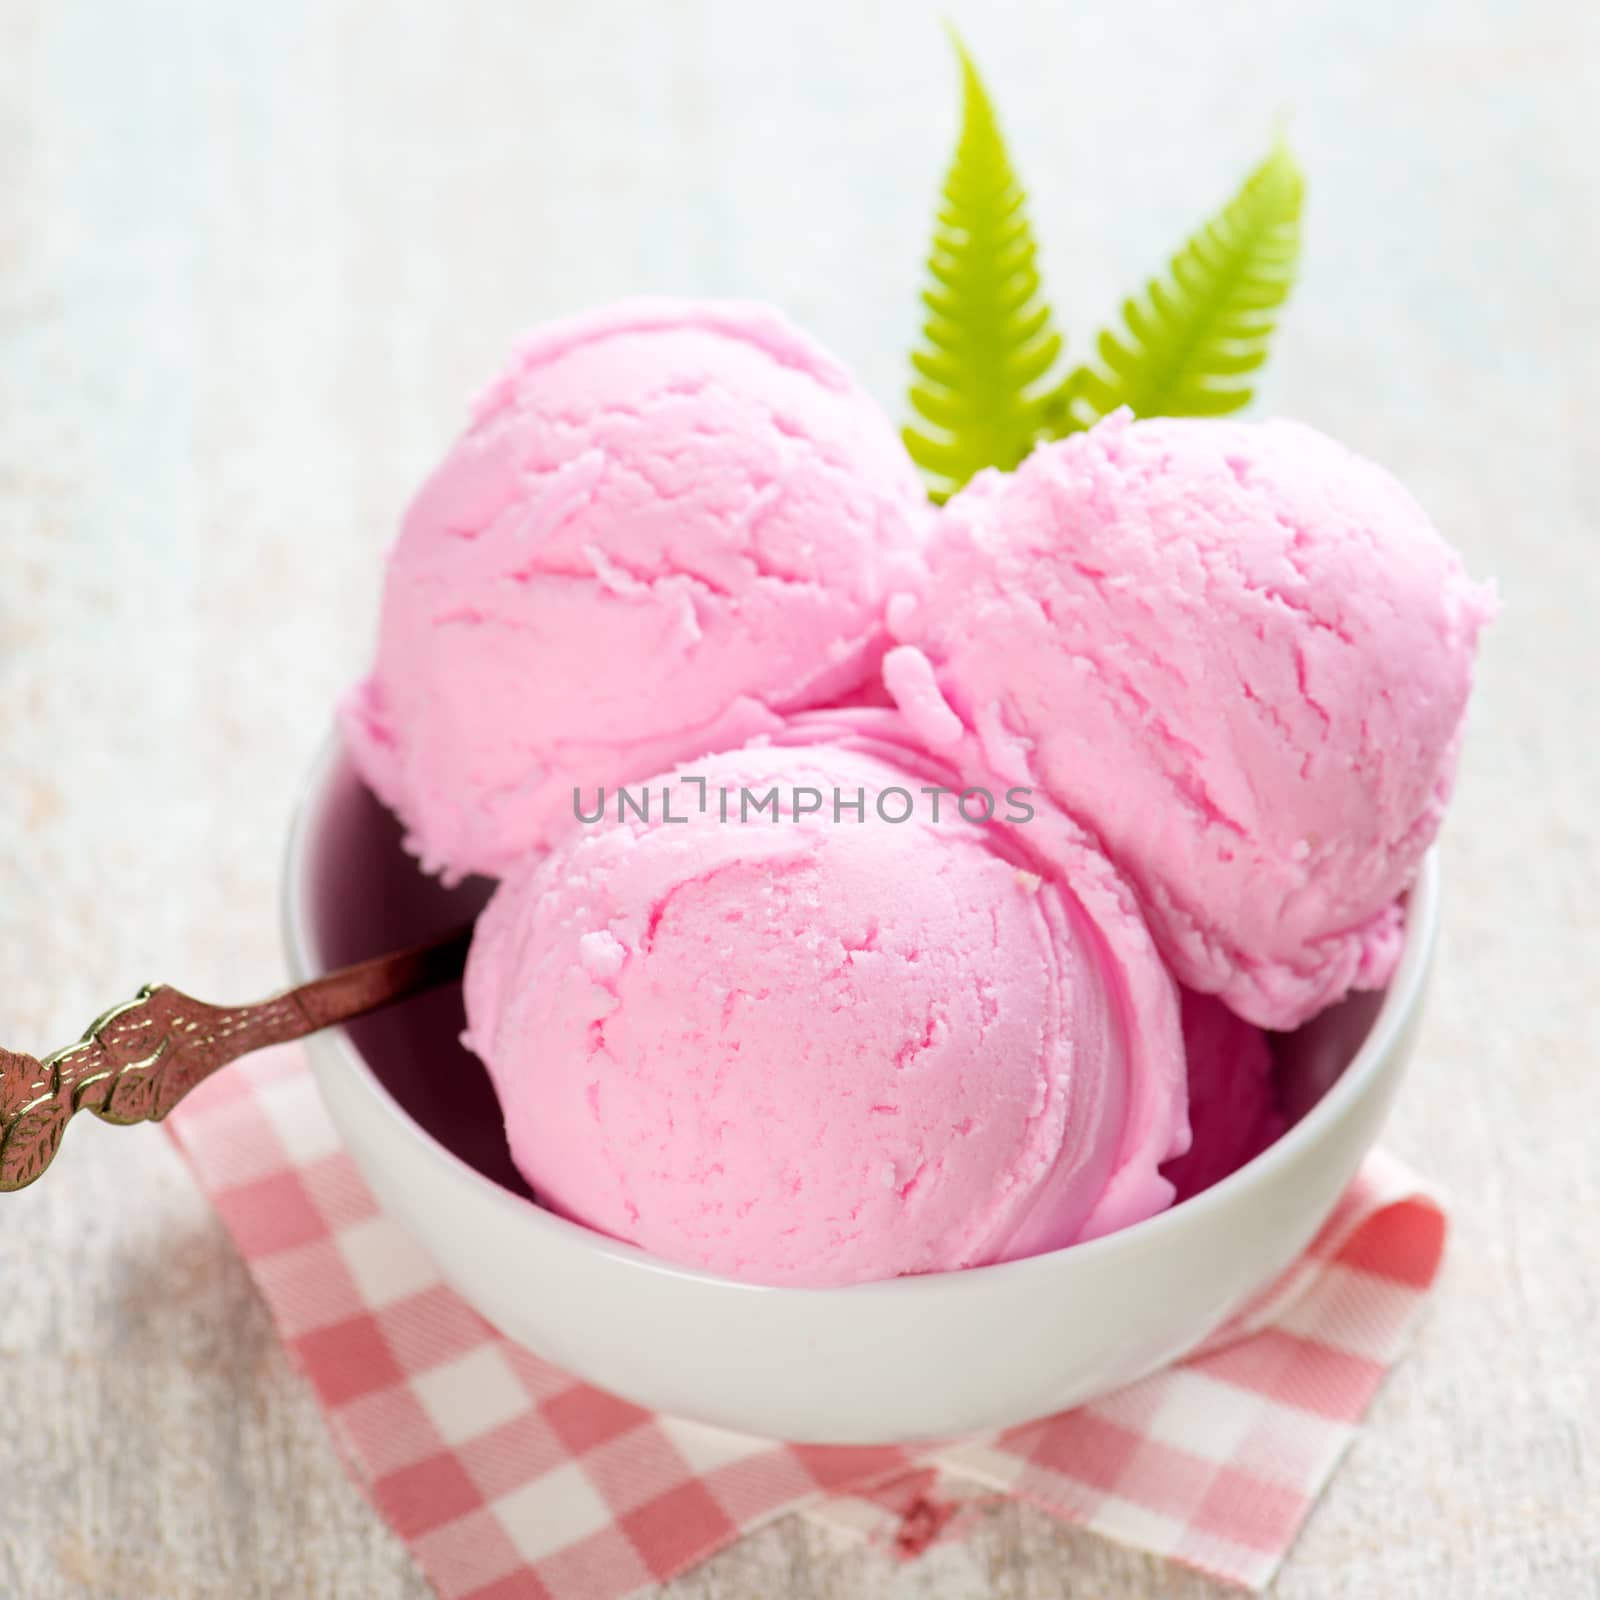 Strawberry ice cream in bowl on white wooden background.